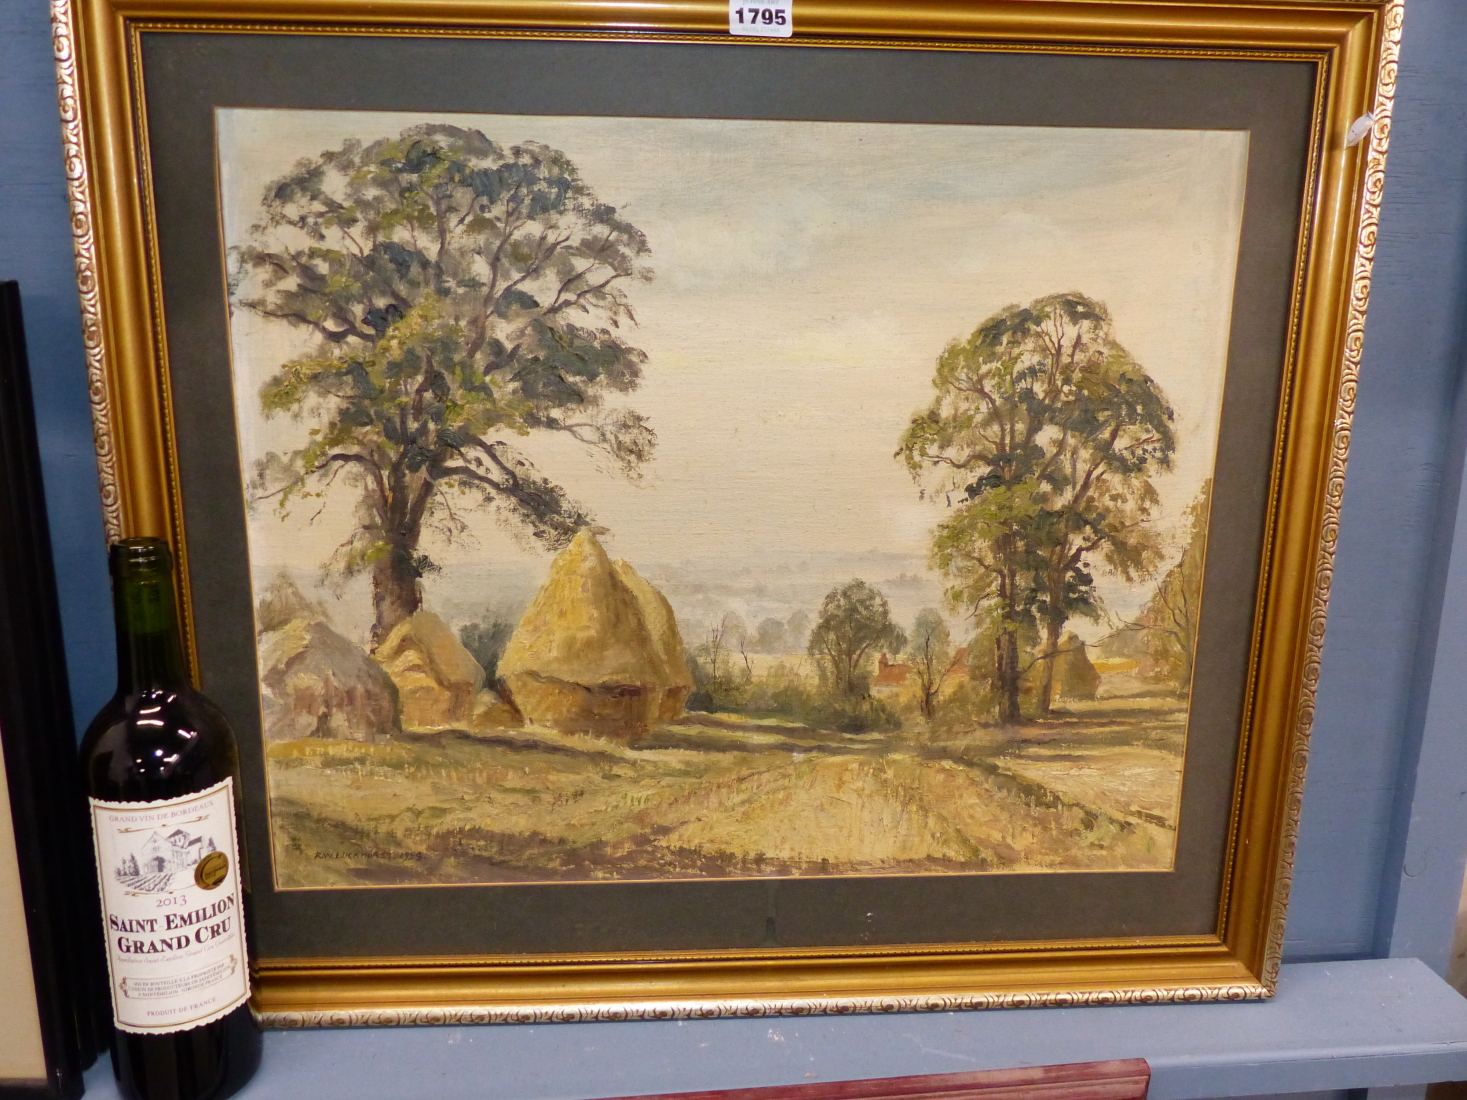 R.W. LUCKHURST (20TH CENTURY), HAYSTACKS AND ELM TREES IN AN EXTENSIVE LANDSCAPE, SIGNED AND DATED - Image 3 of 5